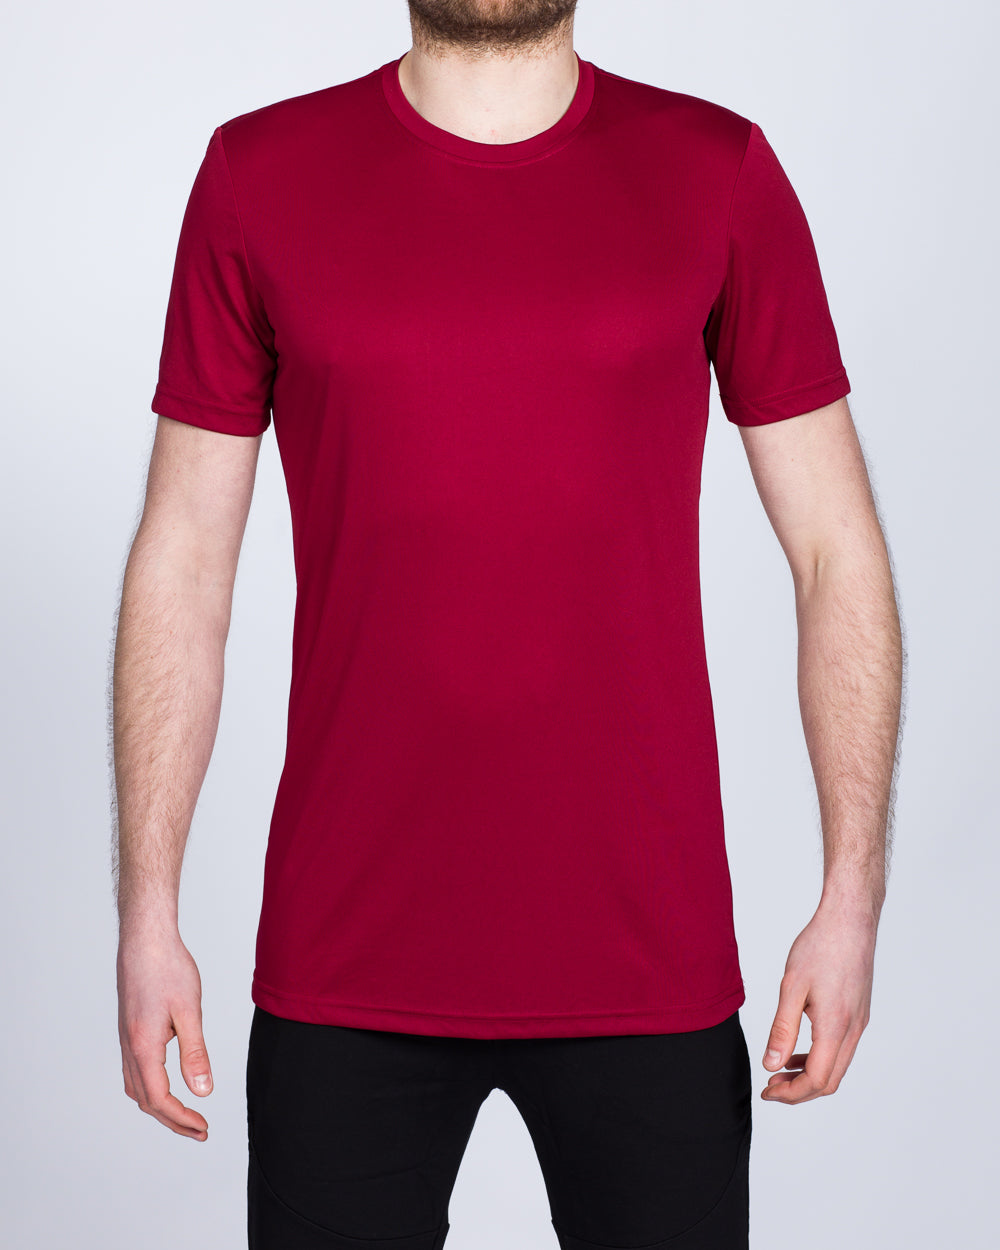 2t Dry Tech Training Top (deep red)